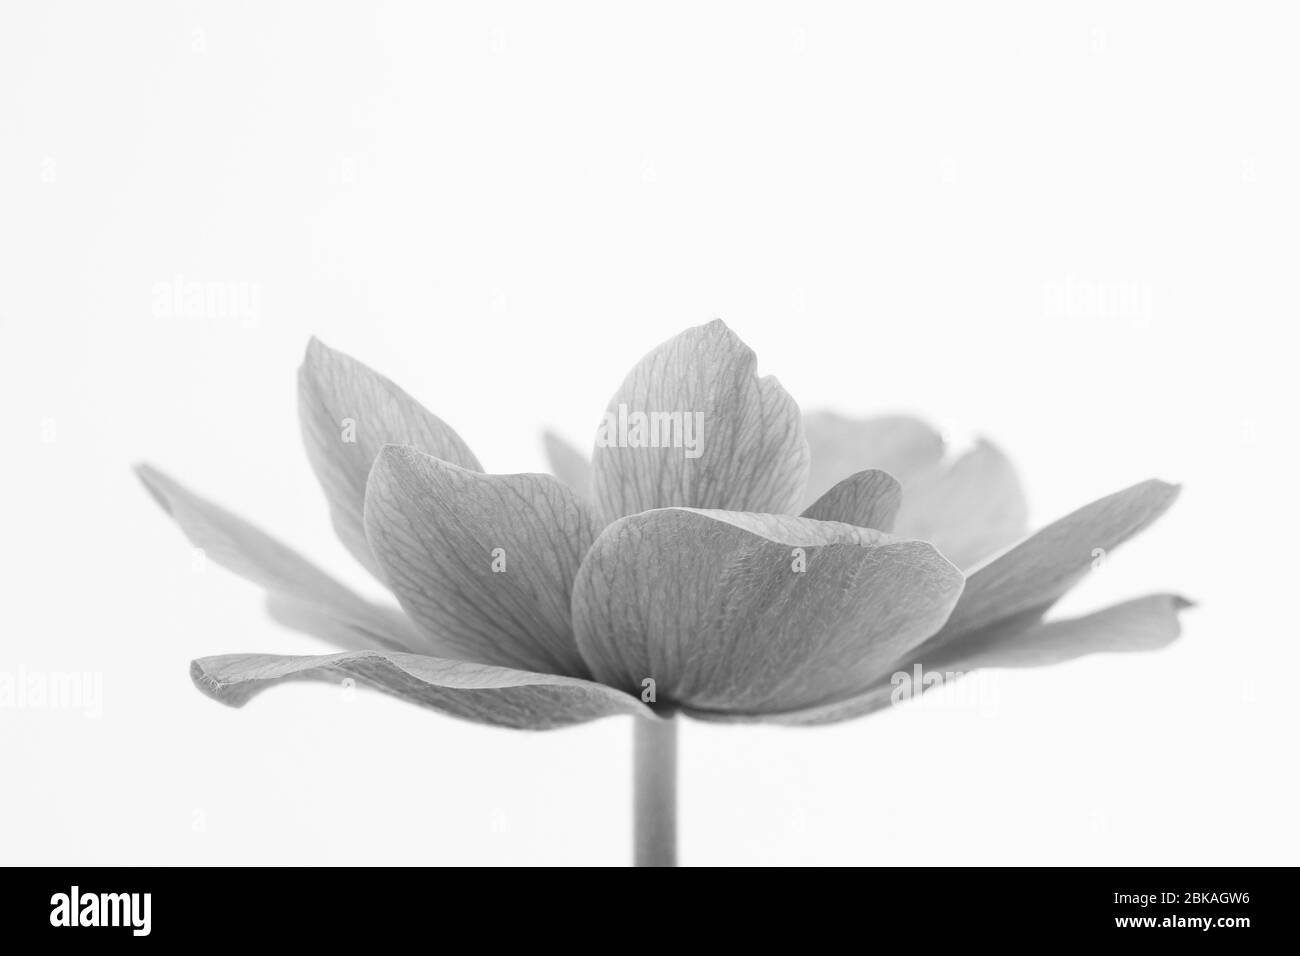 Black and white image of the delicate petals of a Anemone flower against a white background Stock Photo